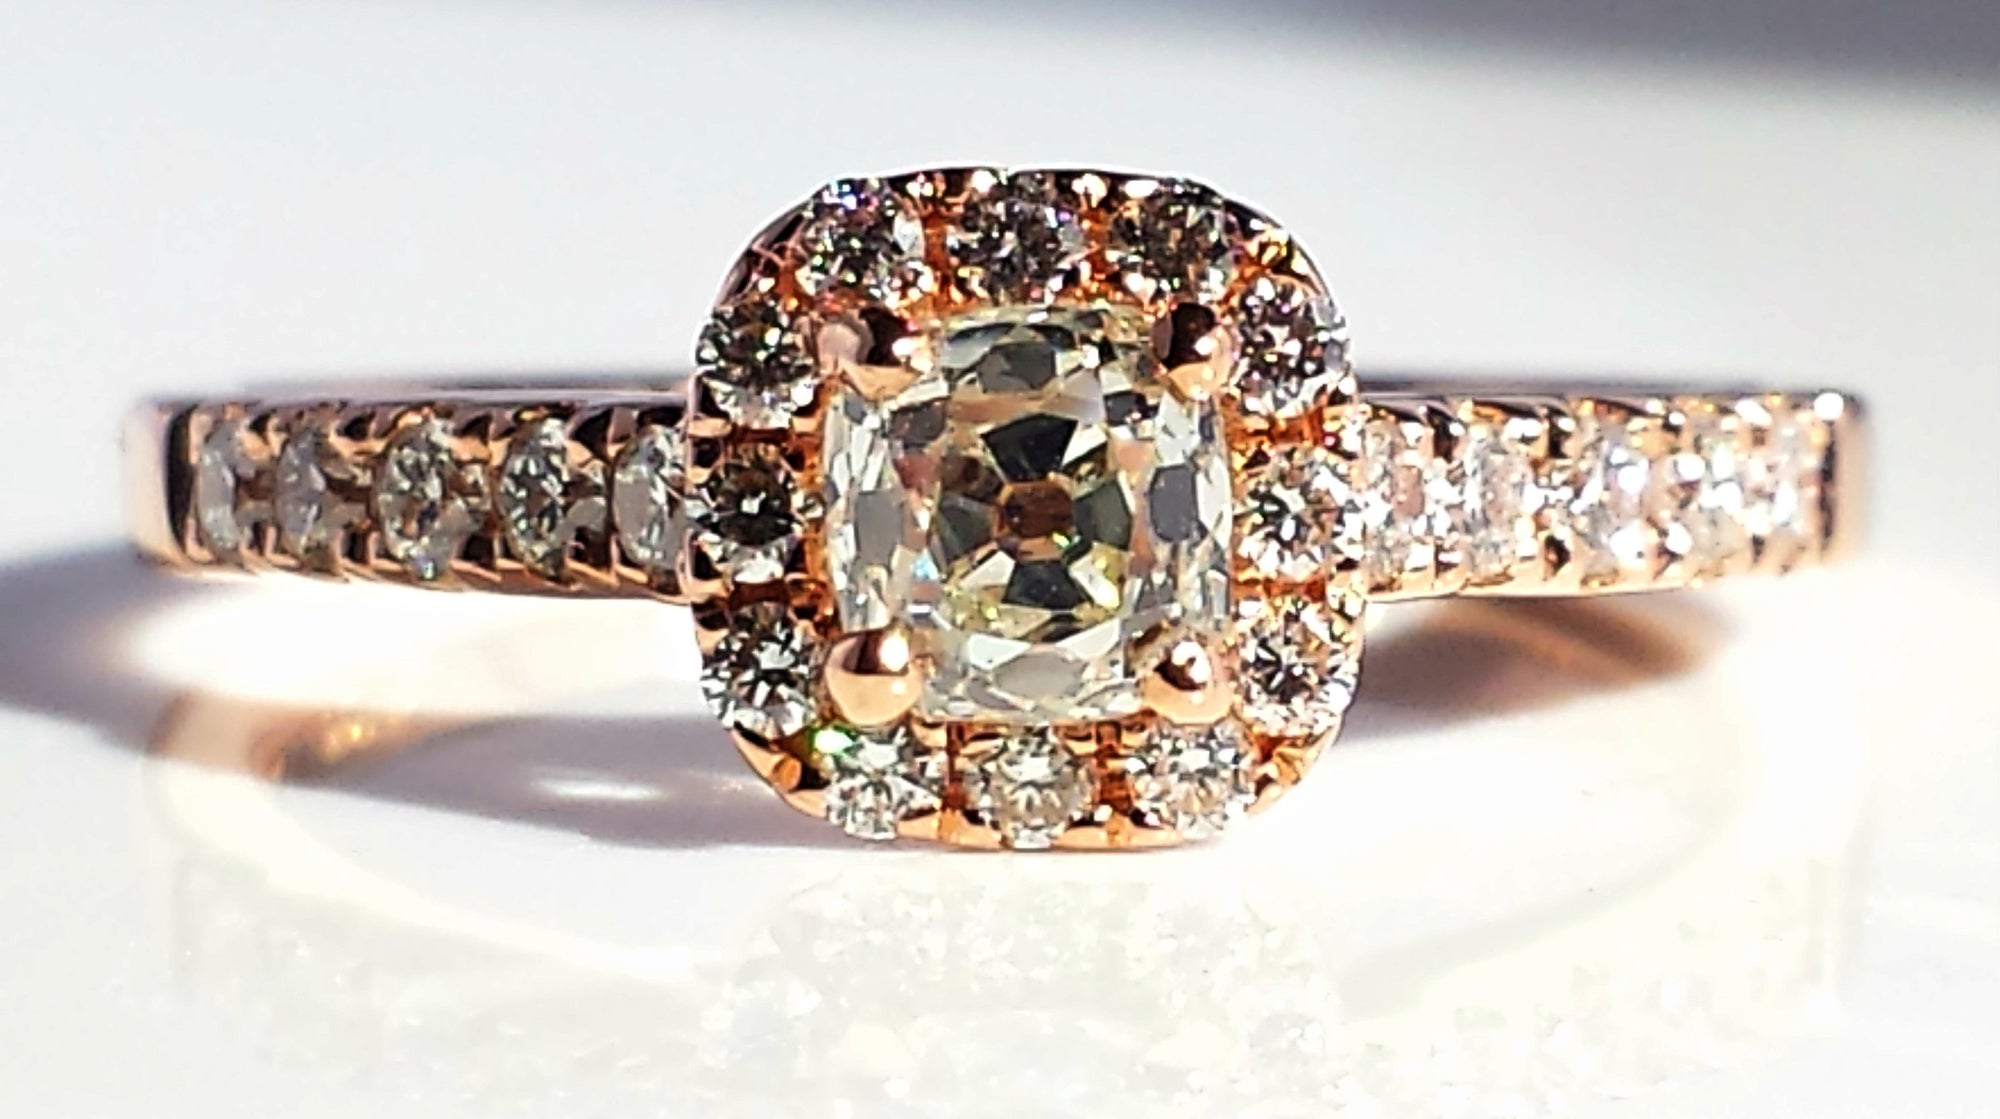 Sustainable Ethical Diamond Halo Engagement Ring in 18K Rose Gold